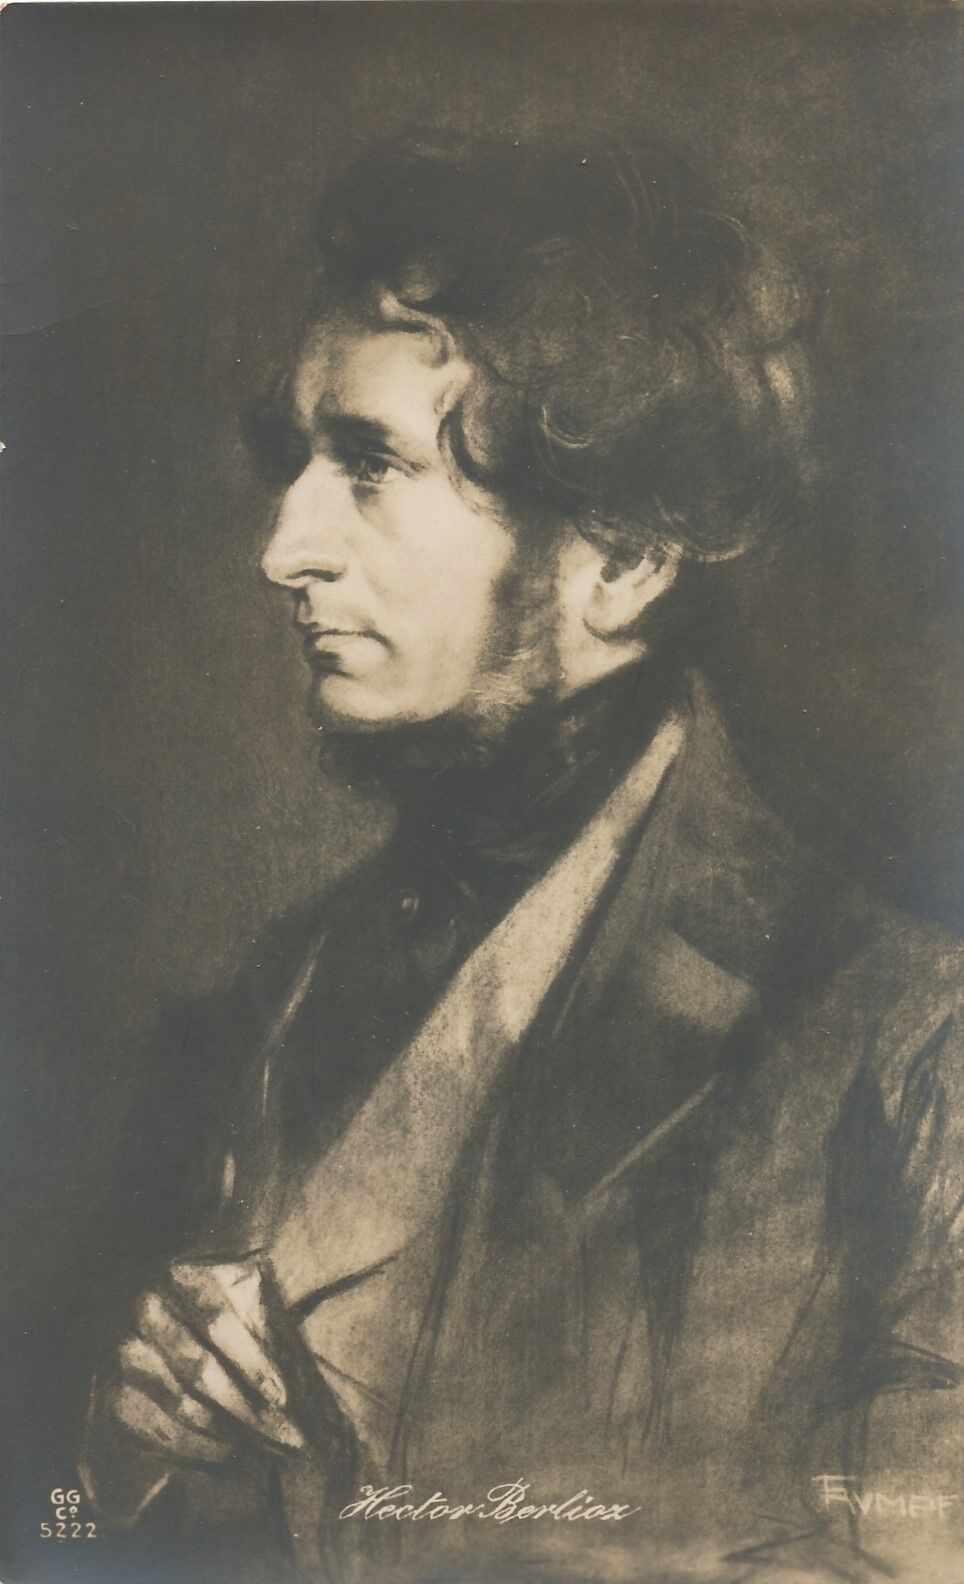 Hector Berlioz – French Composer